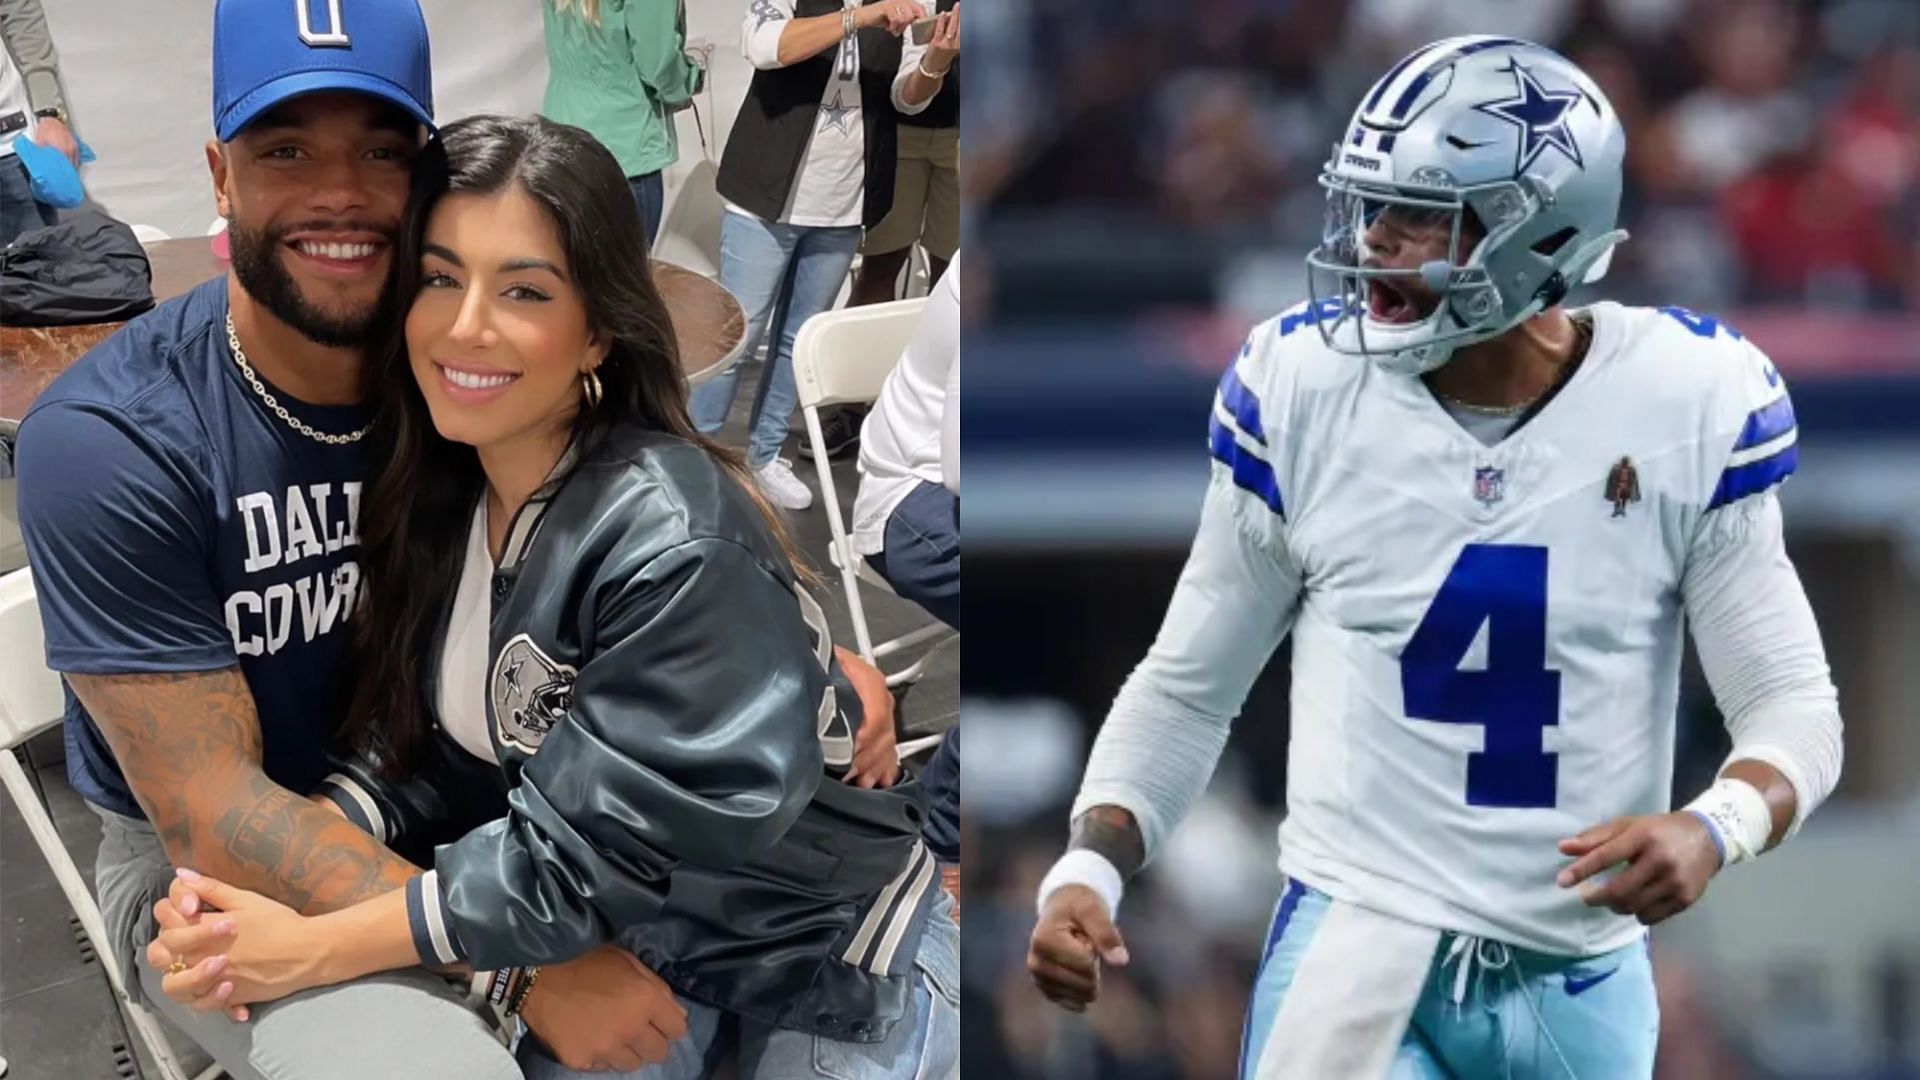 After a 38-3 Defeat Against the Patriots, Sarah Jane Ramos Expresses Her Love for Dak Prescott: 'Proud of My Cowboy'